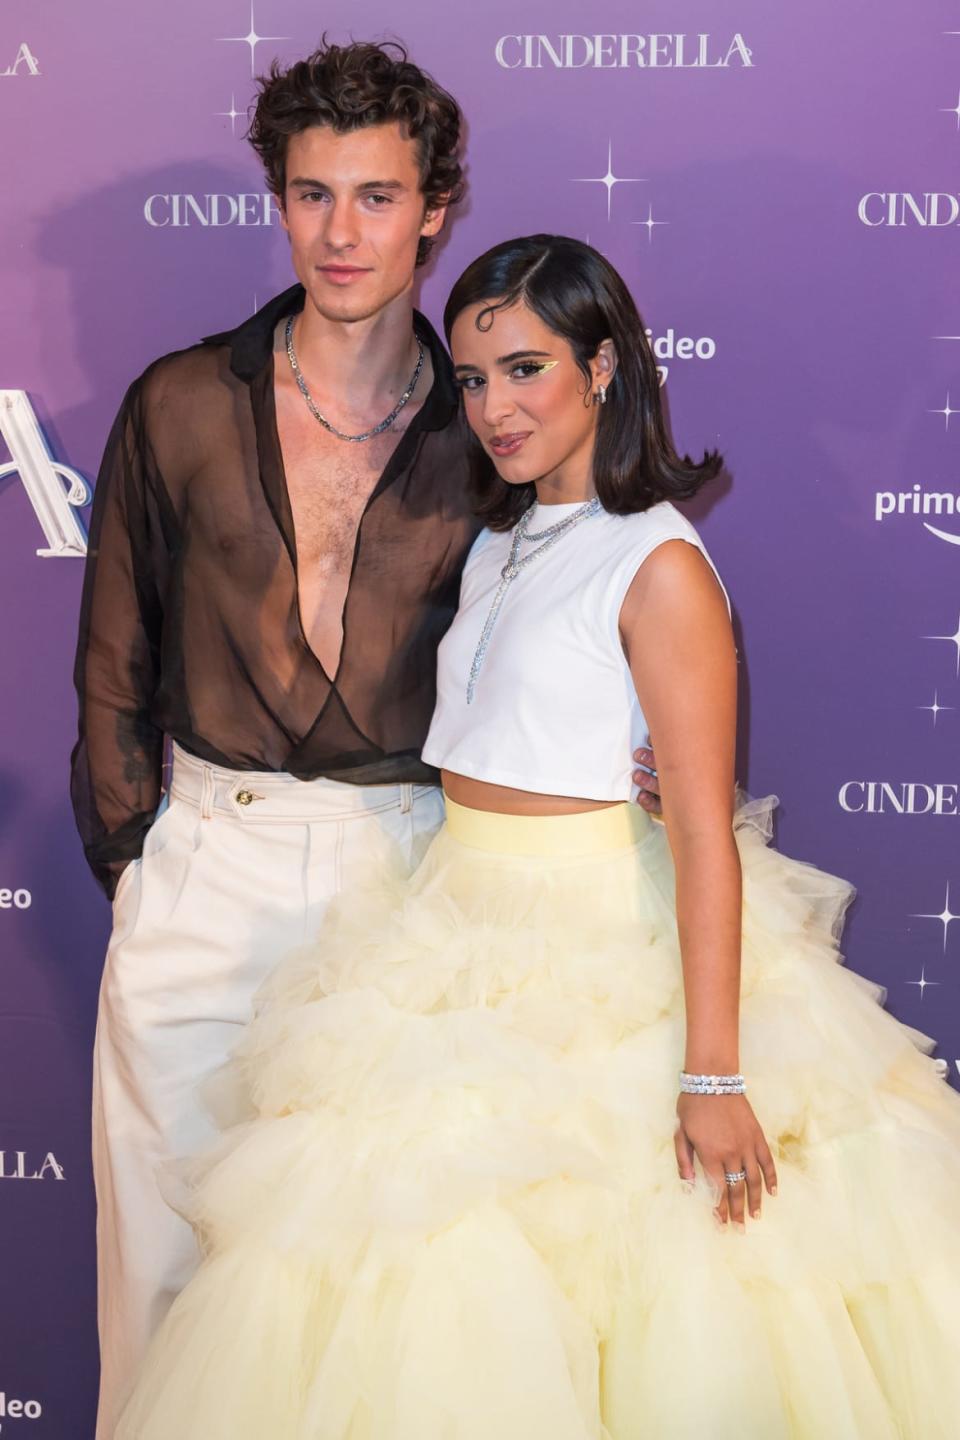 <div class="inline-image__caption"><p>Shawn Mendes and Camila Cabello attend the "Cinderella" Miami Premiere at Vizcaya Museum & Gardens on September 01, 2021 in Miami, Florida</p></div> <div class="inline-image__credit">Jason Koerner/Getty</div>